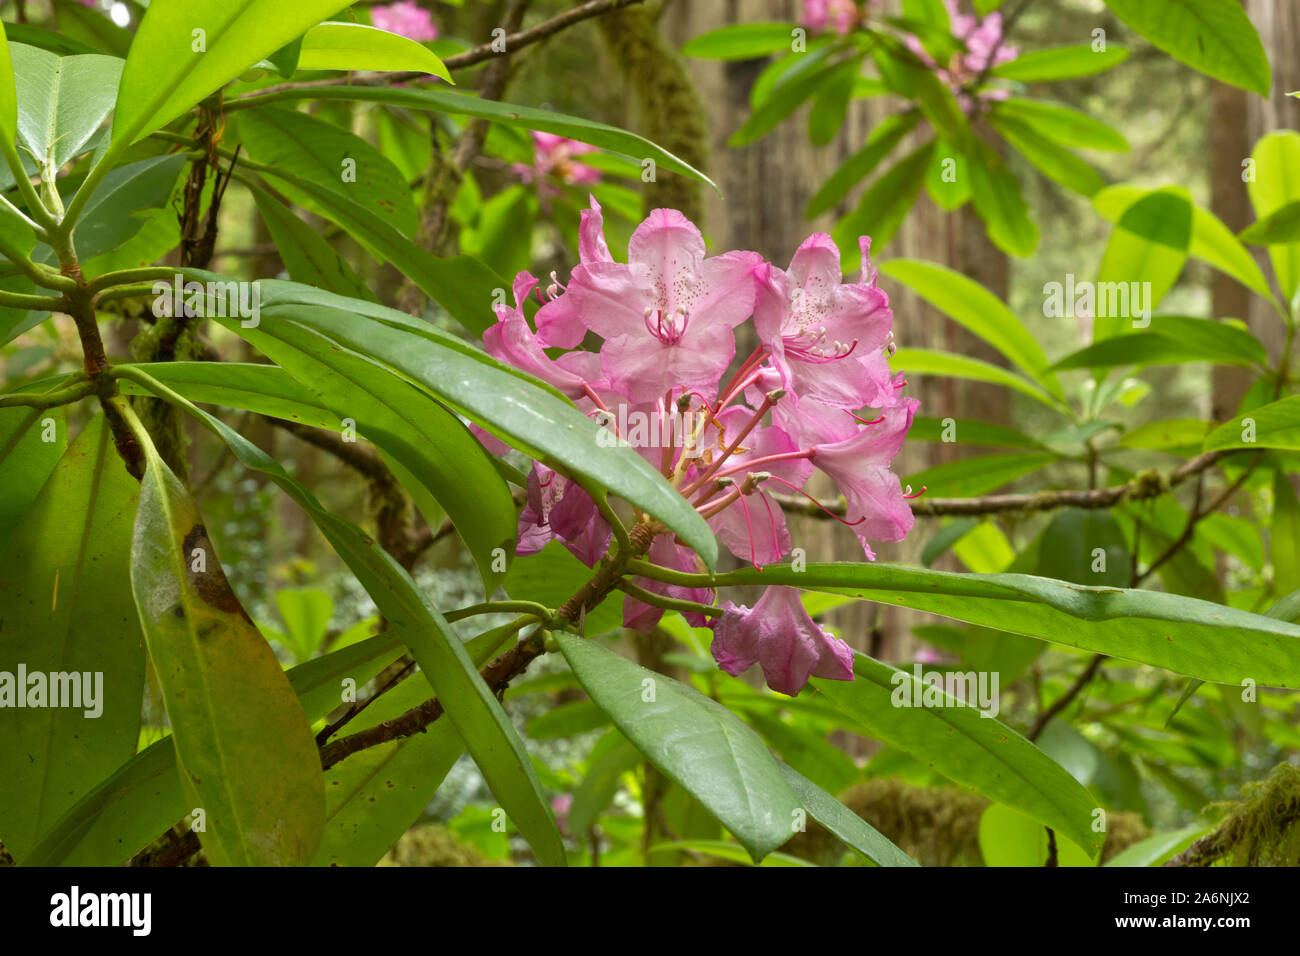 CA03795-00...CALIFORNIA - Native rhododendrons blooming among the redwood trees along the Hiochi Trail in Jedediah Smith Redwoods State Park. Stock Photo